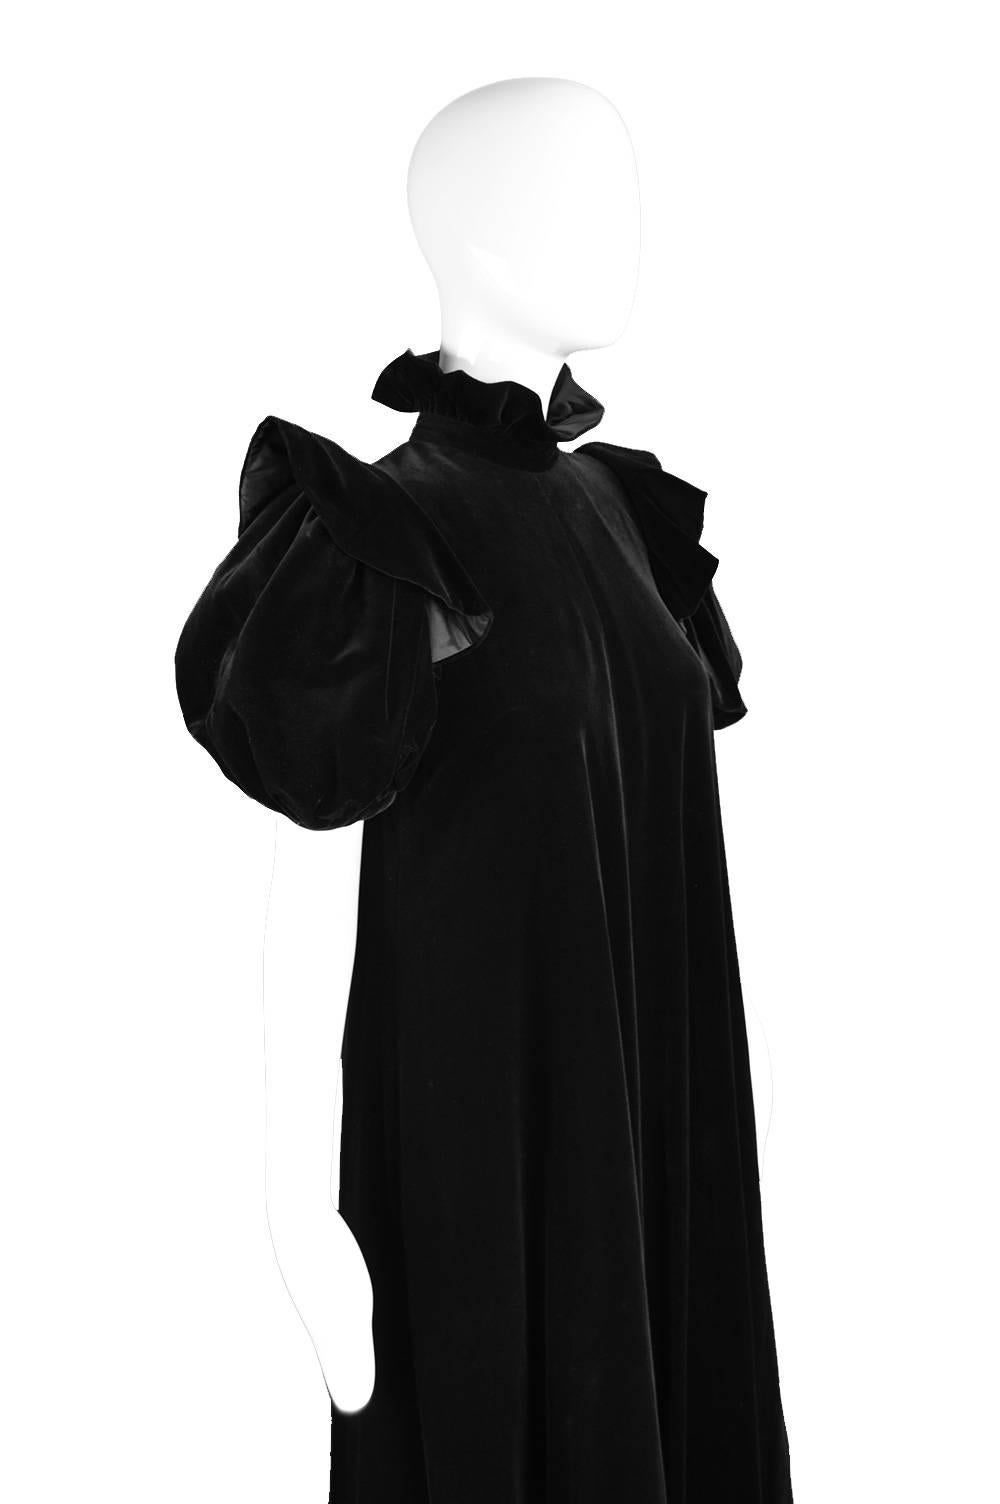 Women's Gina Fratini Black Velvet Gown with Dramatic Puff Sleeve, 1970s